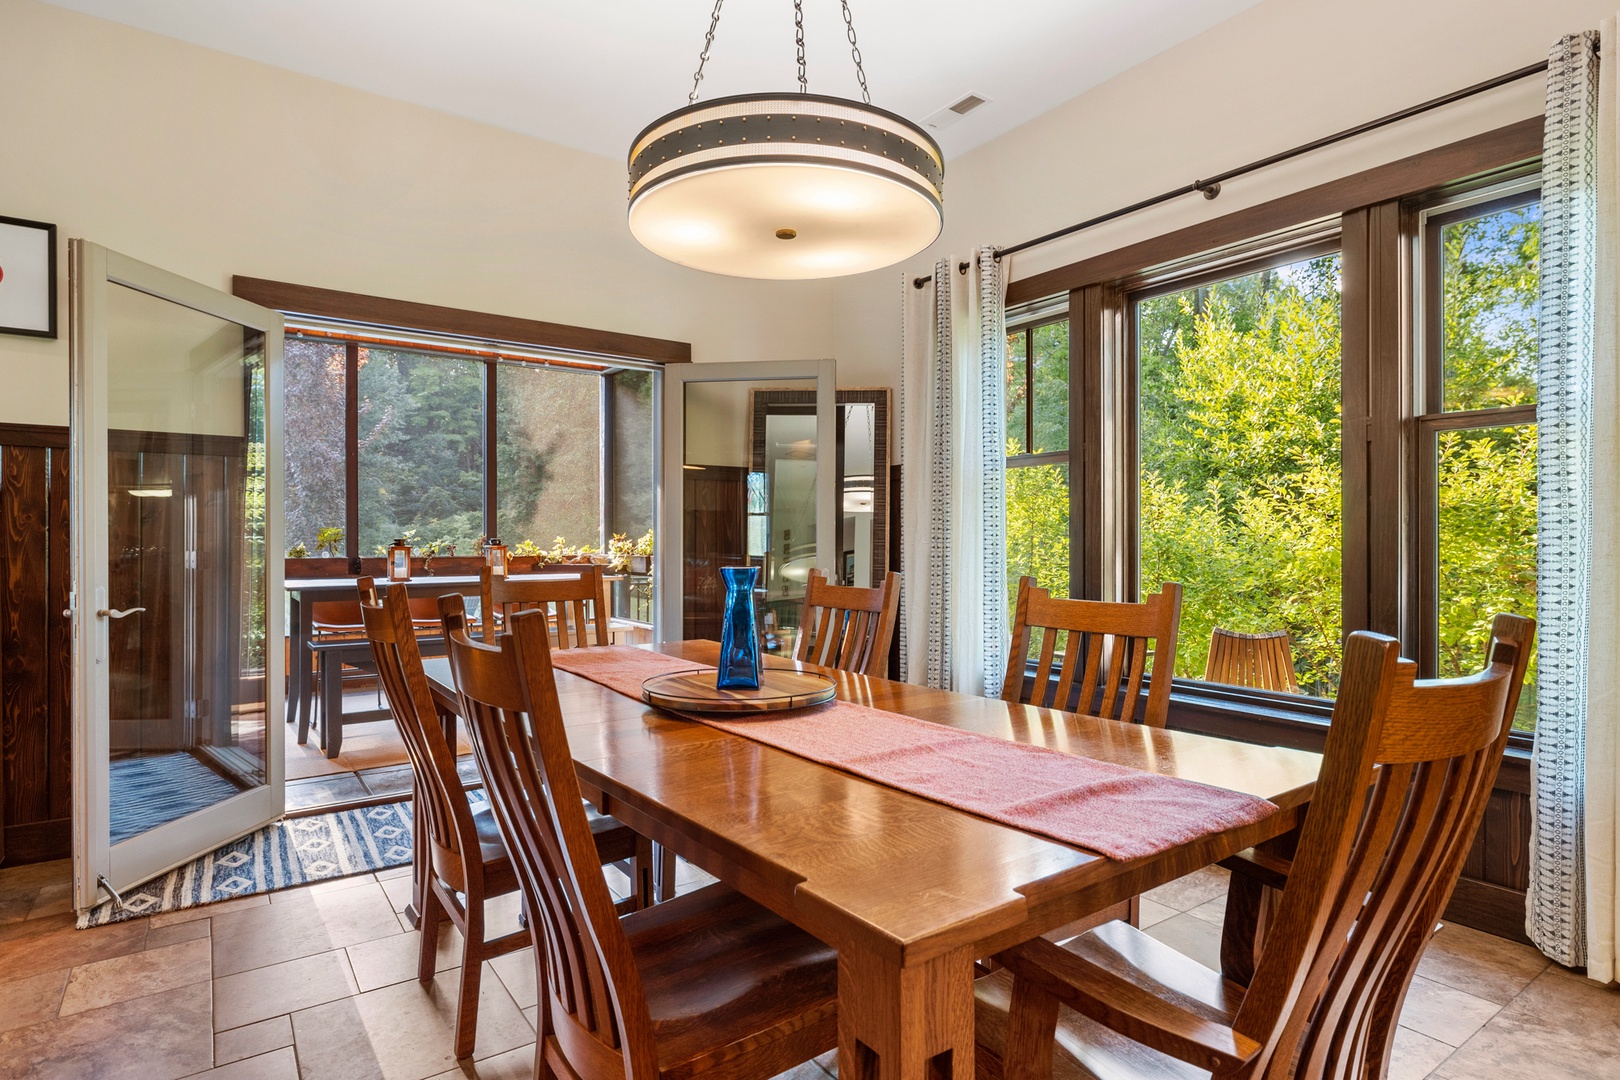 Seamlessly transition from indoor to outdoor dining off the main dining room.